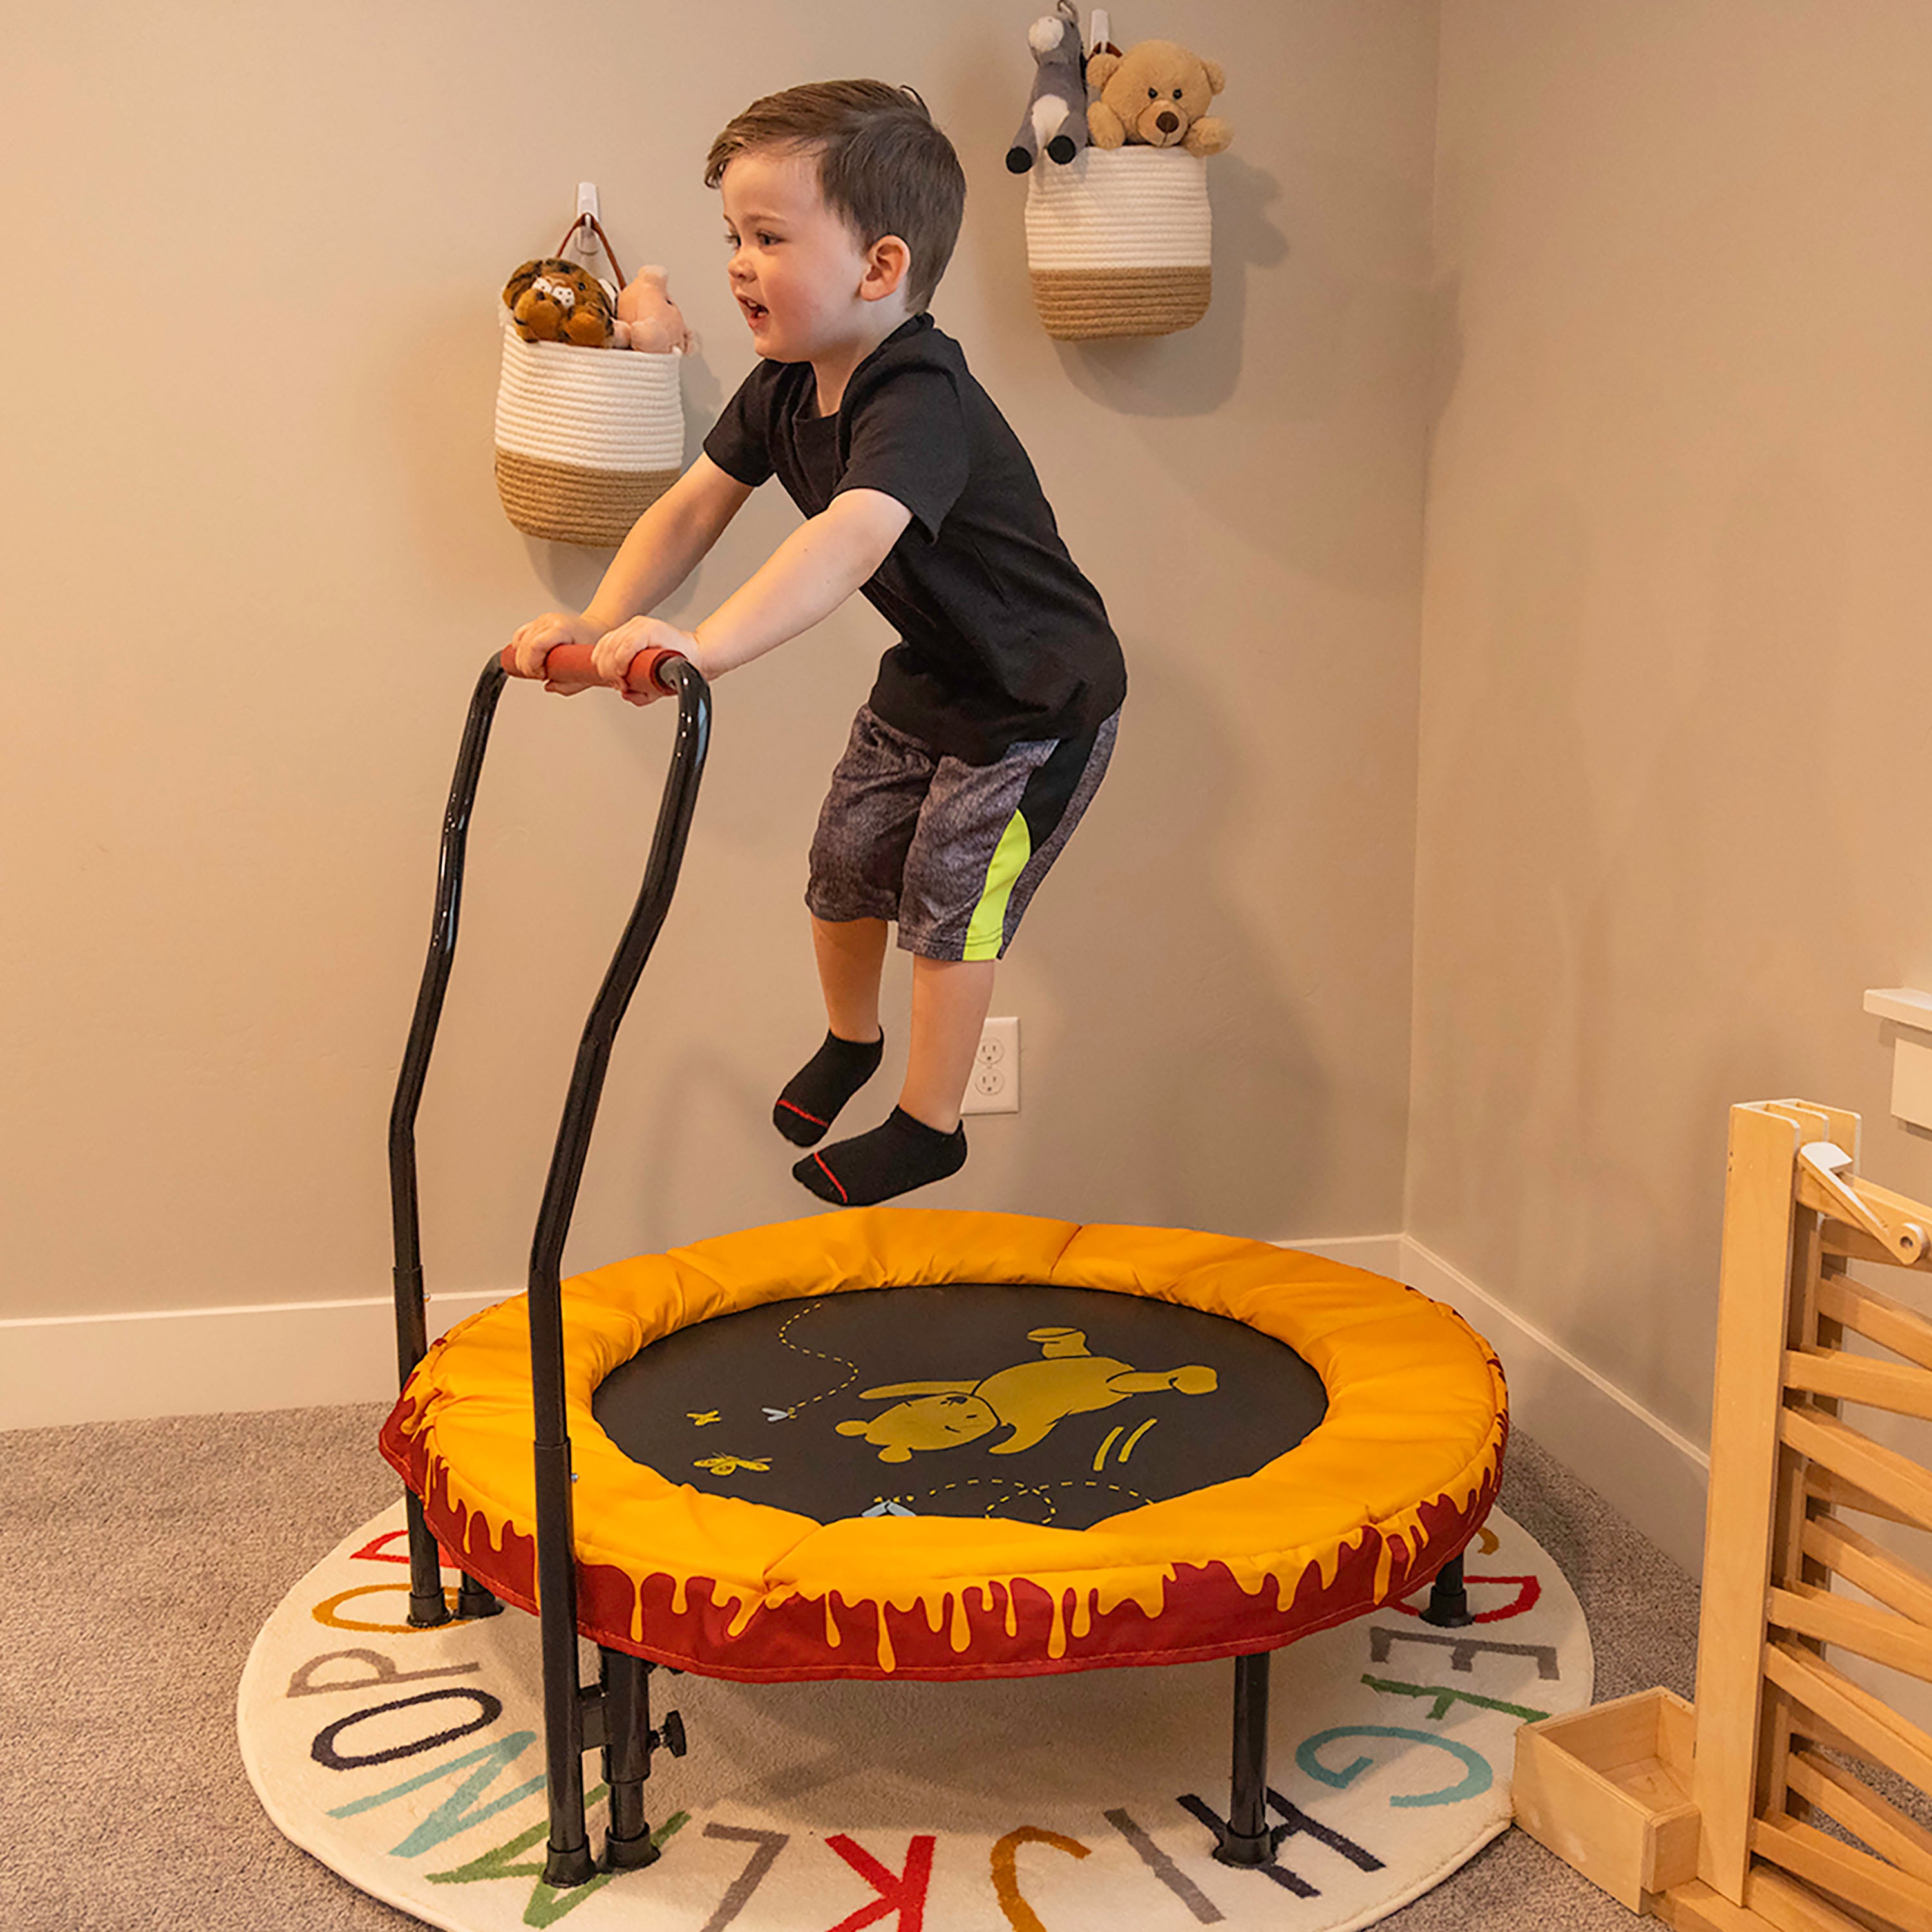 A little boy jumps high on the 36” Winnie the Pooh trampoline while it sits in the corner of the playroom. 